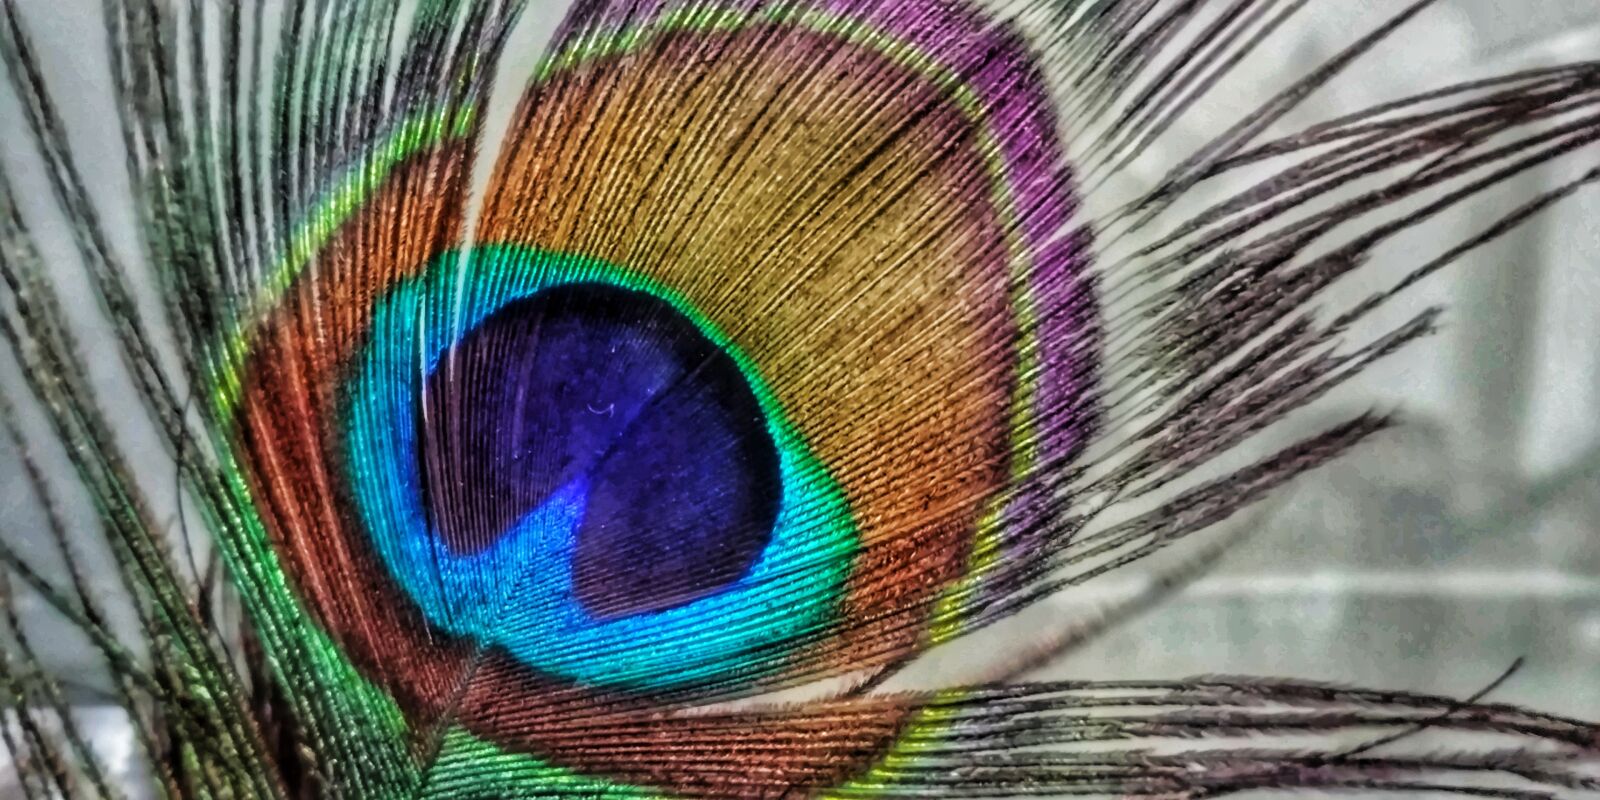 LG G6 sample photo. Indian, peacock, feather photography